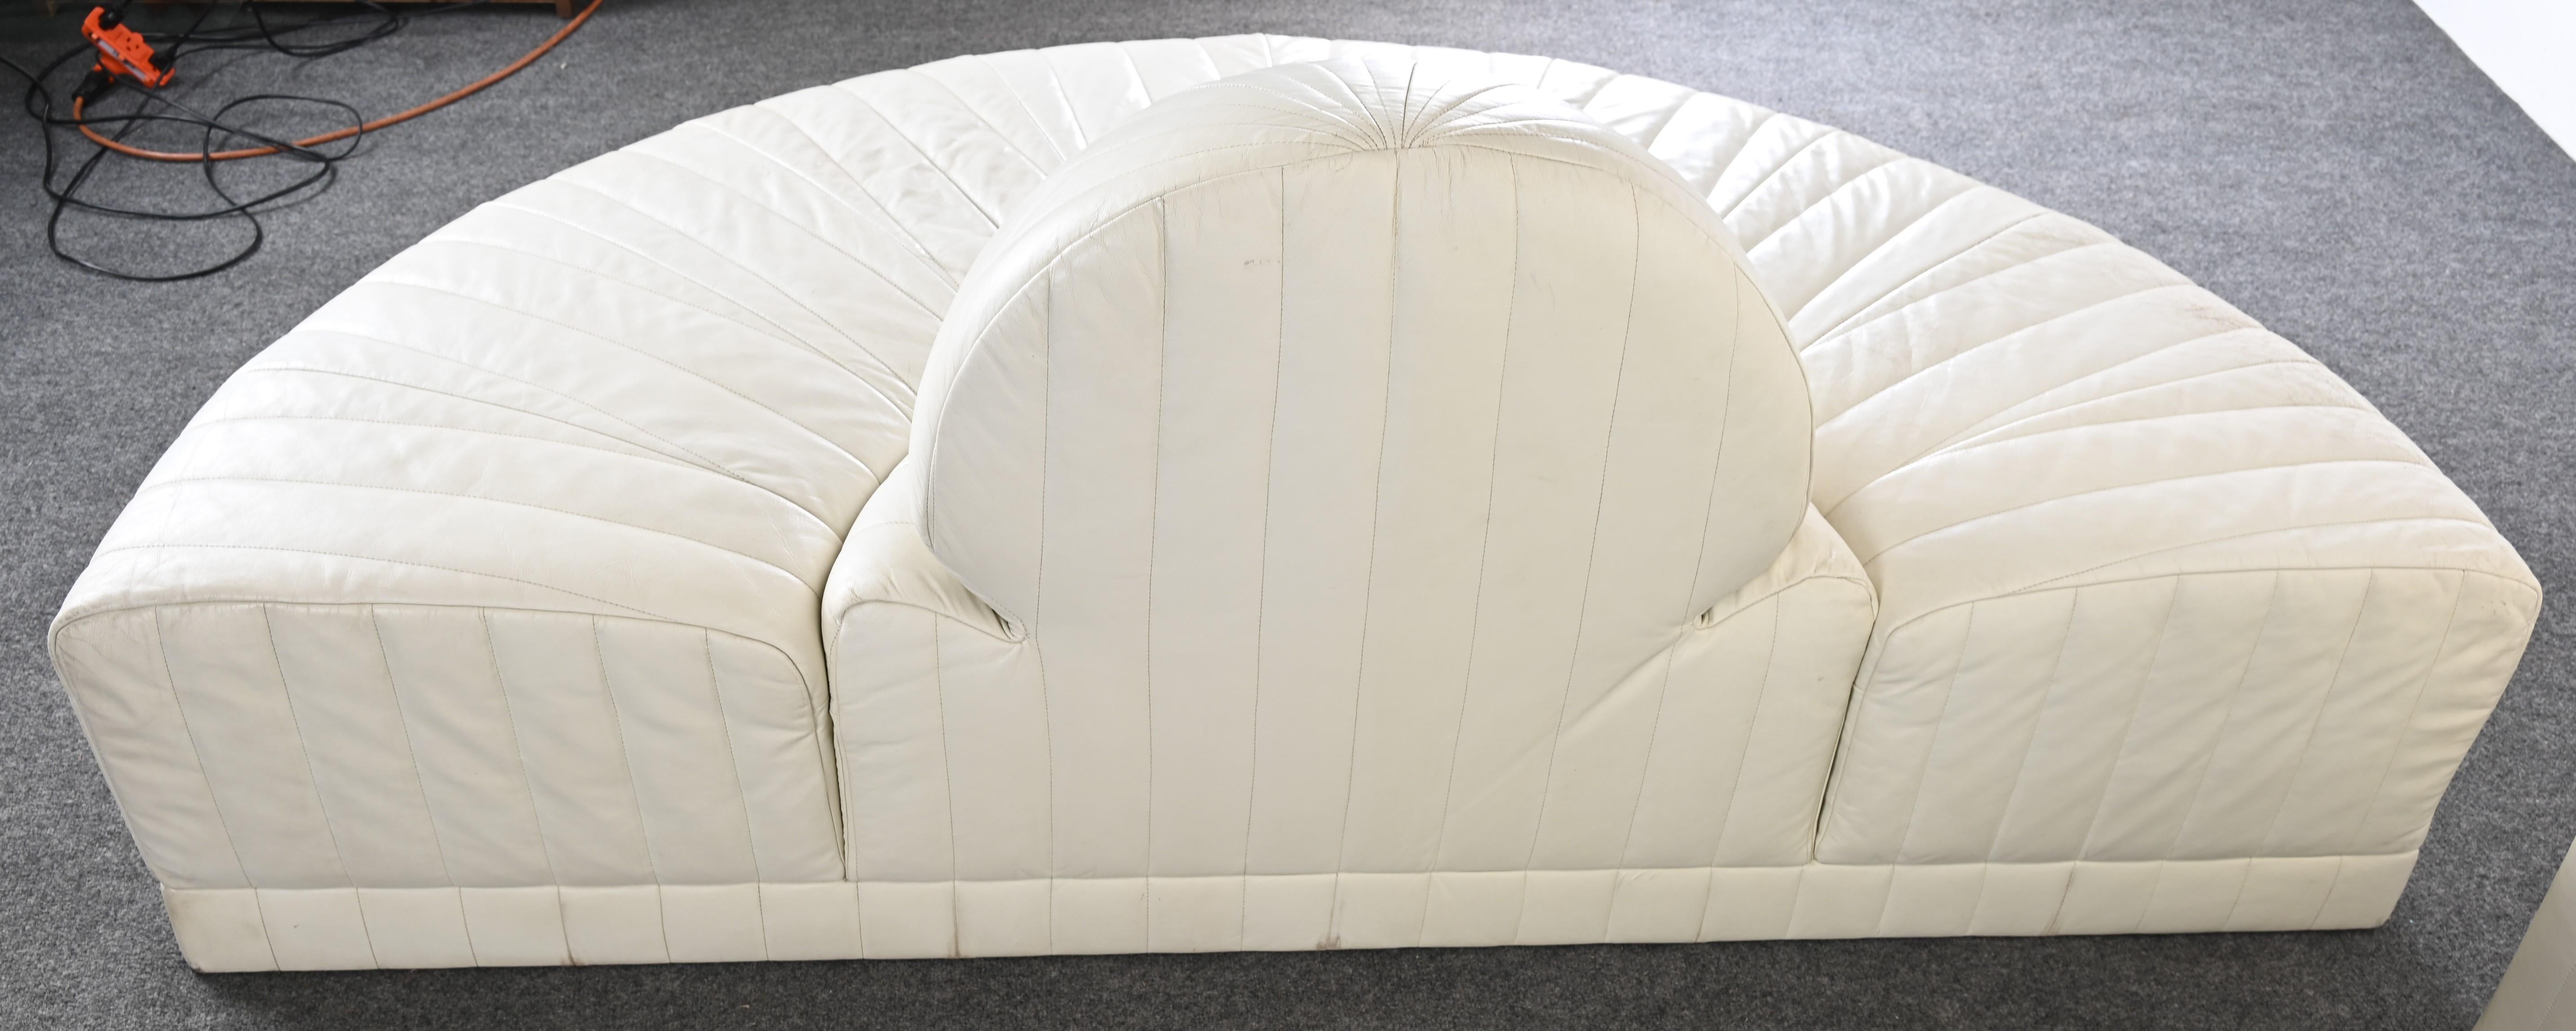 Four Piece White Leather Sectional Sofa by Roche Bobois, 1985 6